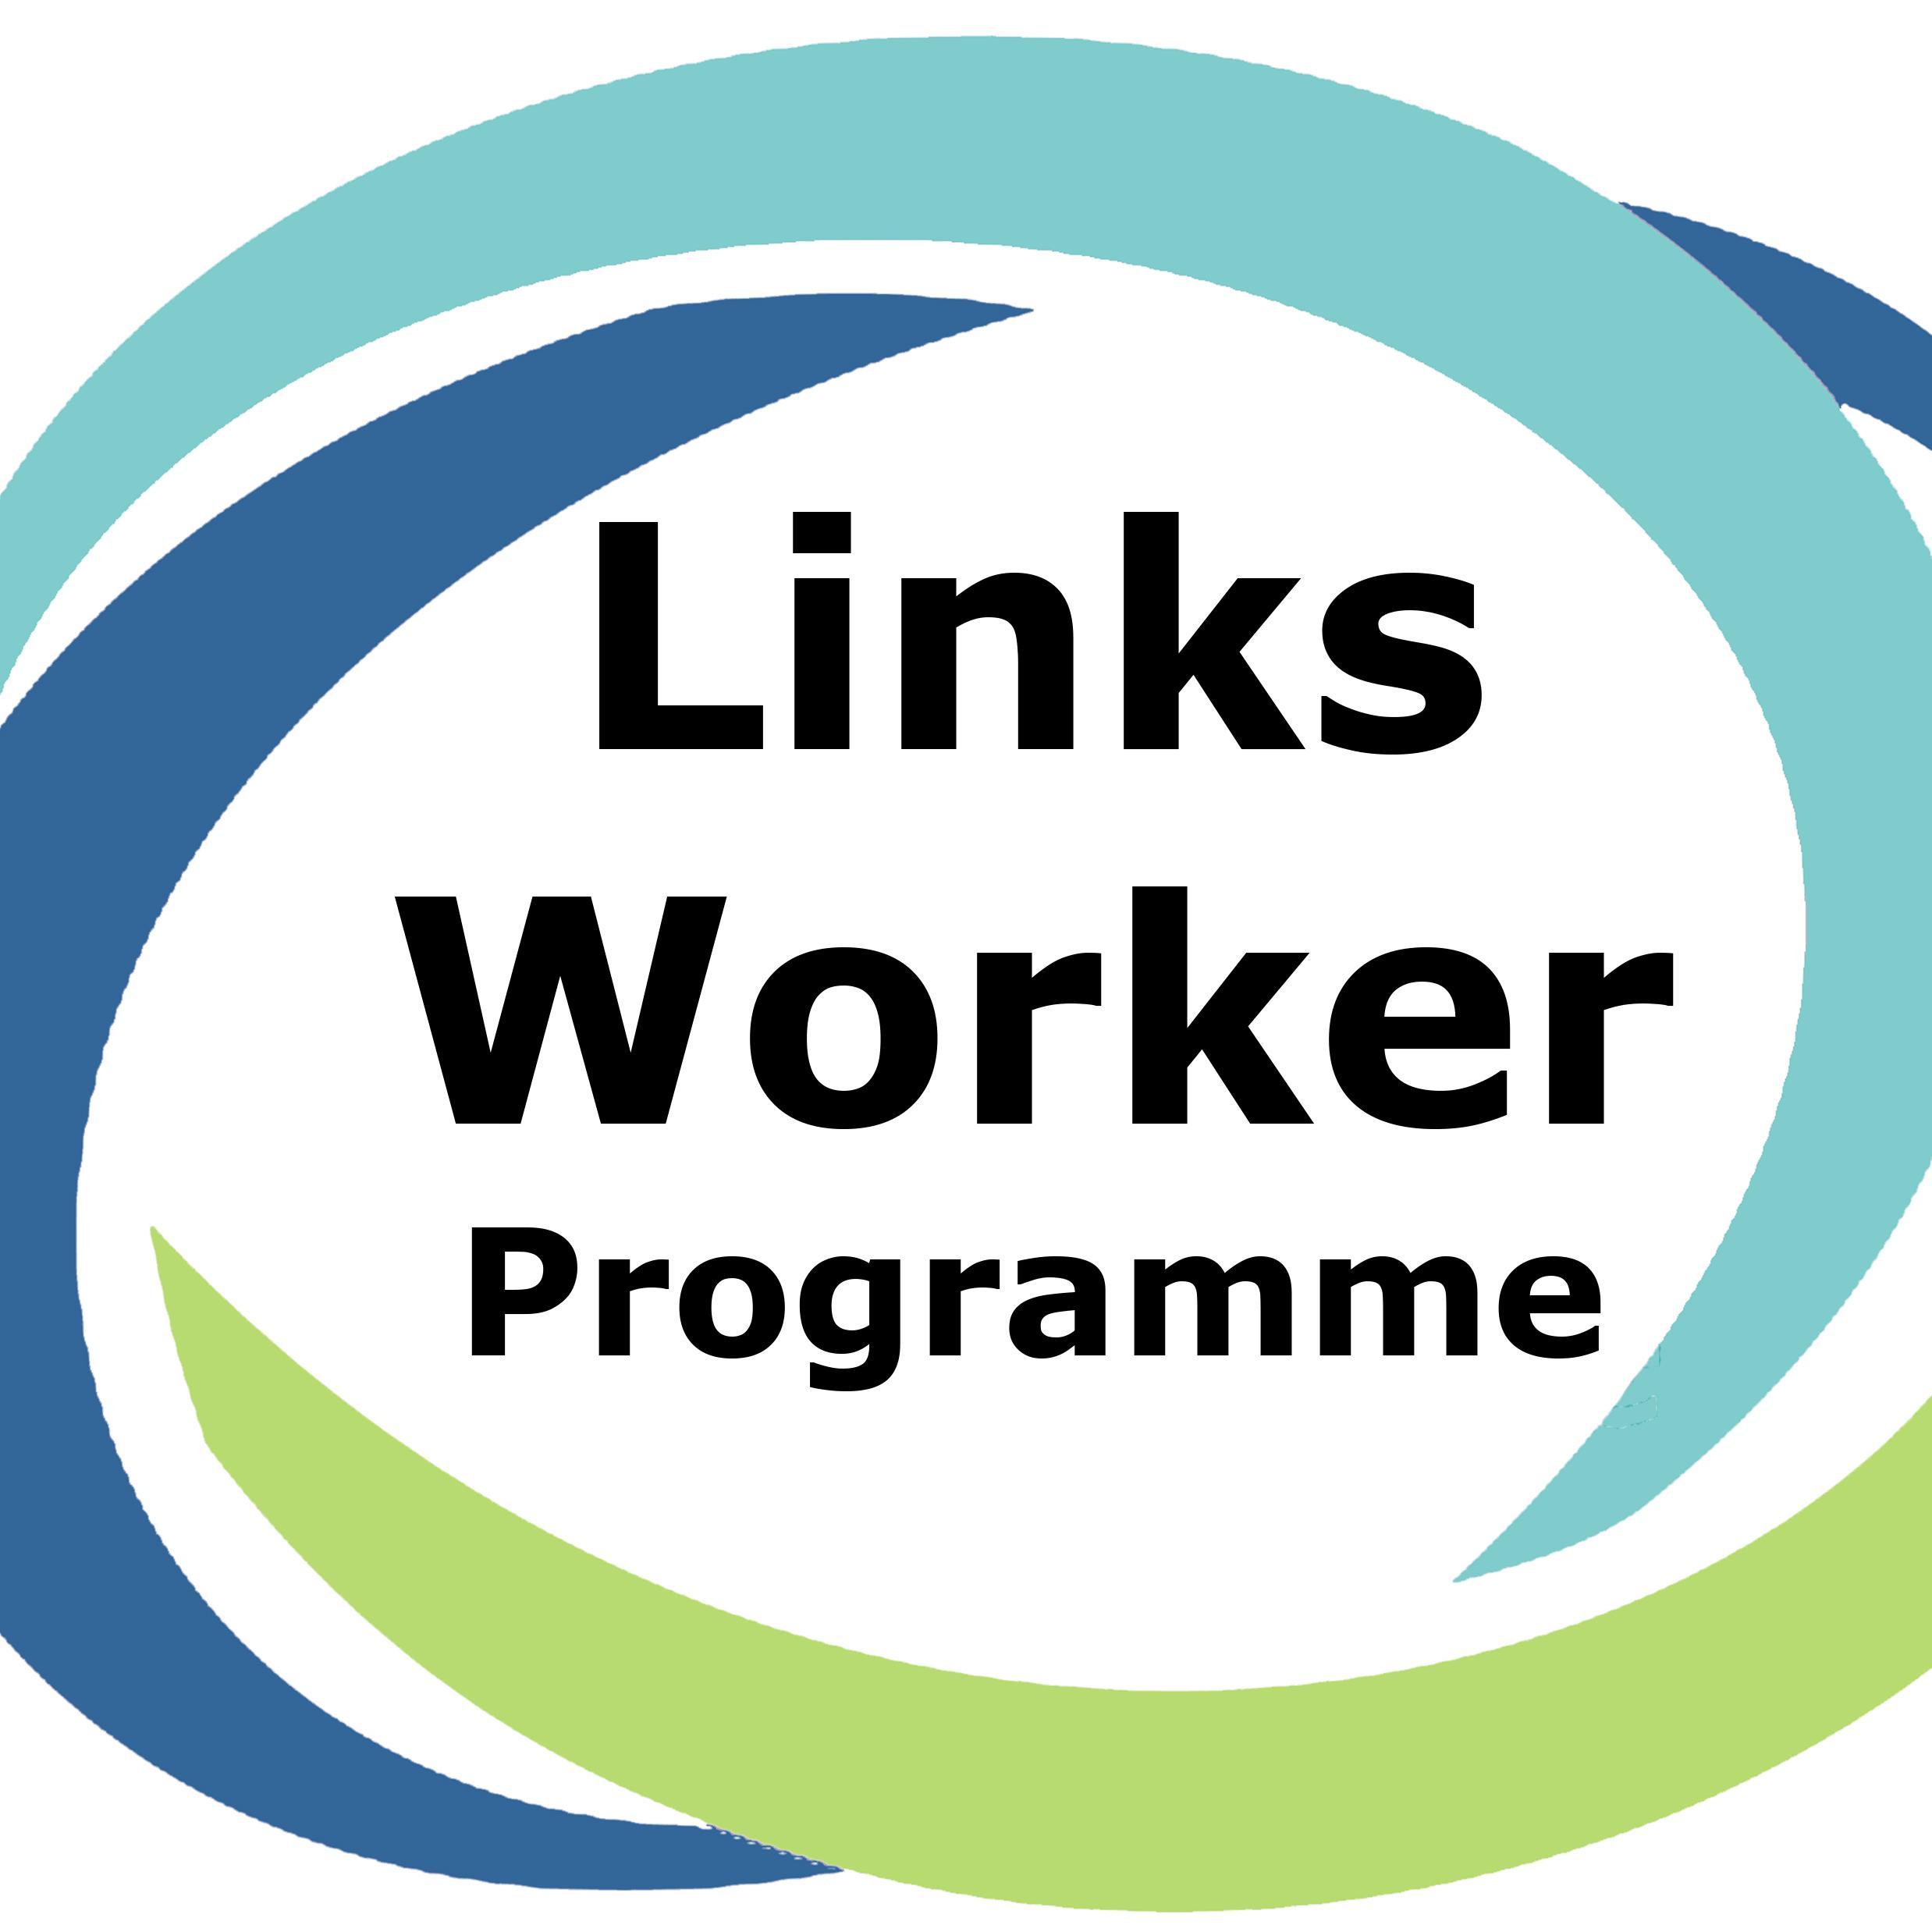 Community Links Worker Programme making links between people and their communities through their GP Practice.  Managed by @ALLIANCEScot.  #makeslinks